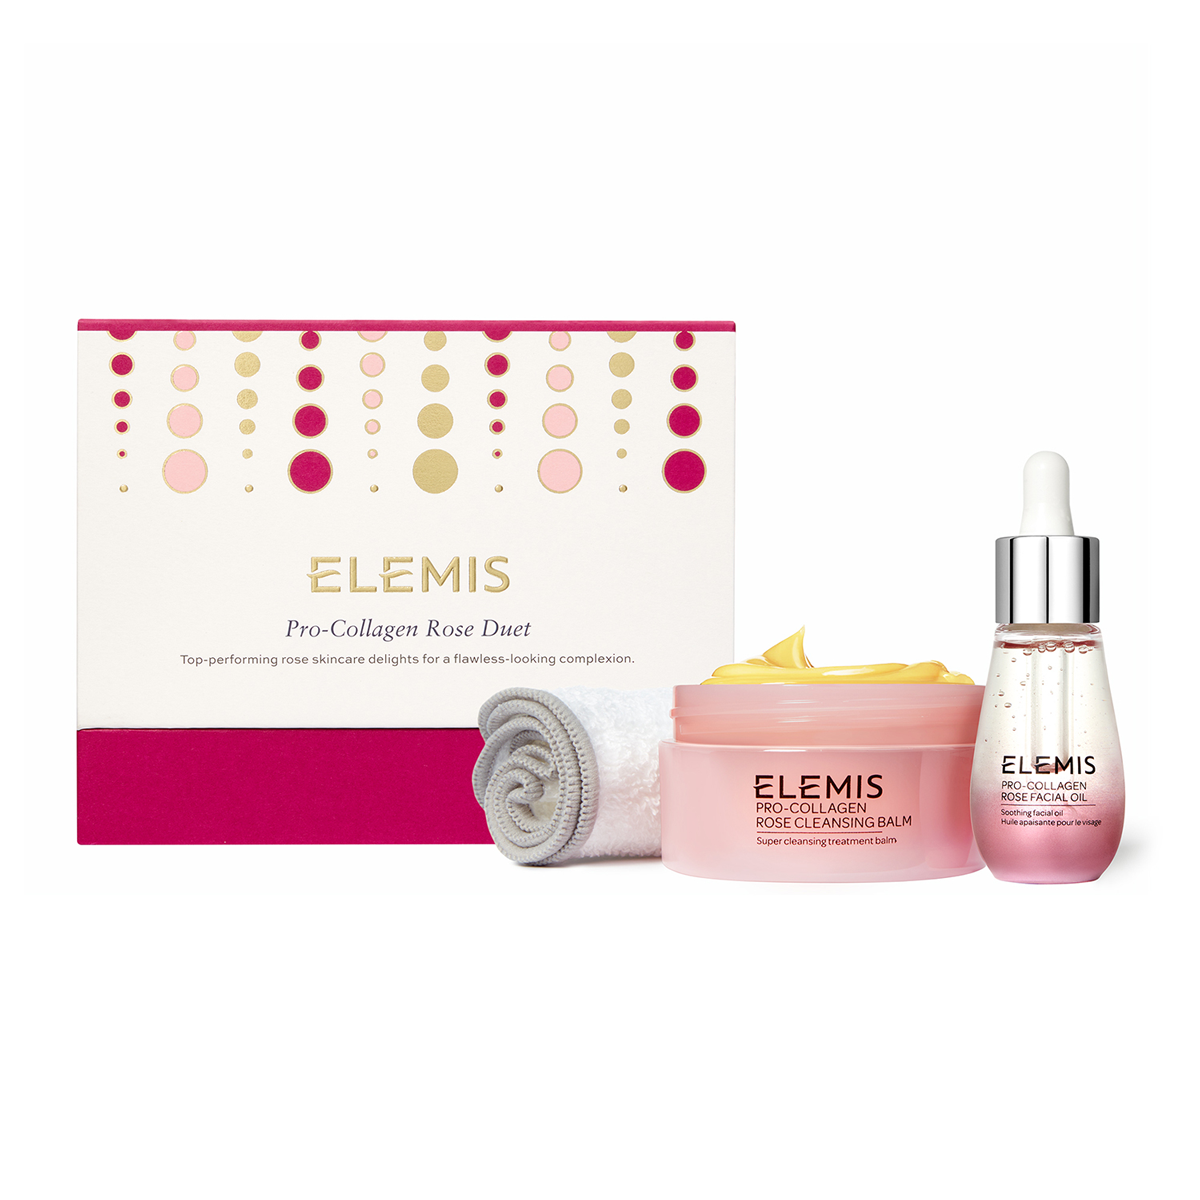 Elemis Pro-Collagen Rose Cleansing Balm and pro-collagen rose facial oil